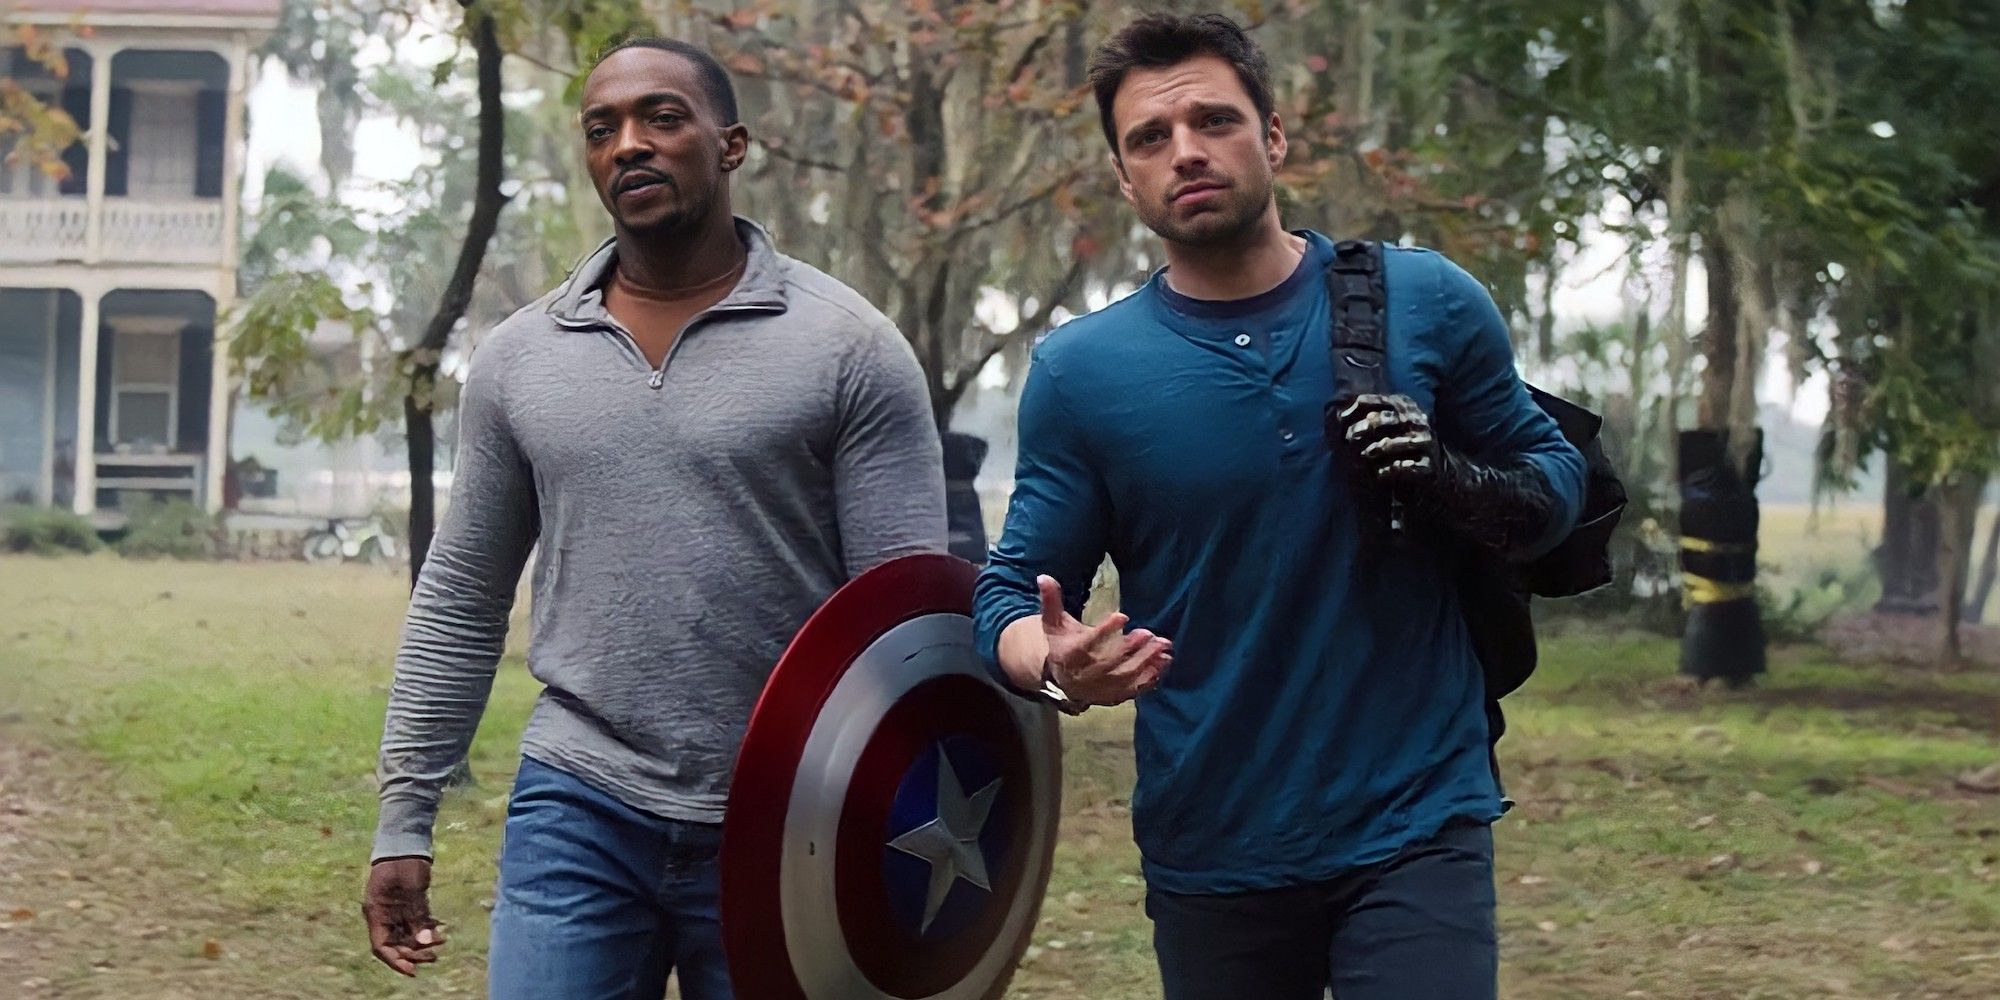 Sam, Bucky, and the shield in The Falcon and the Winter Soldier